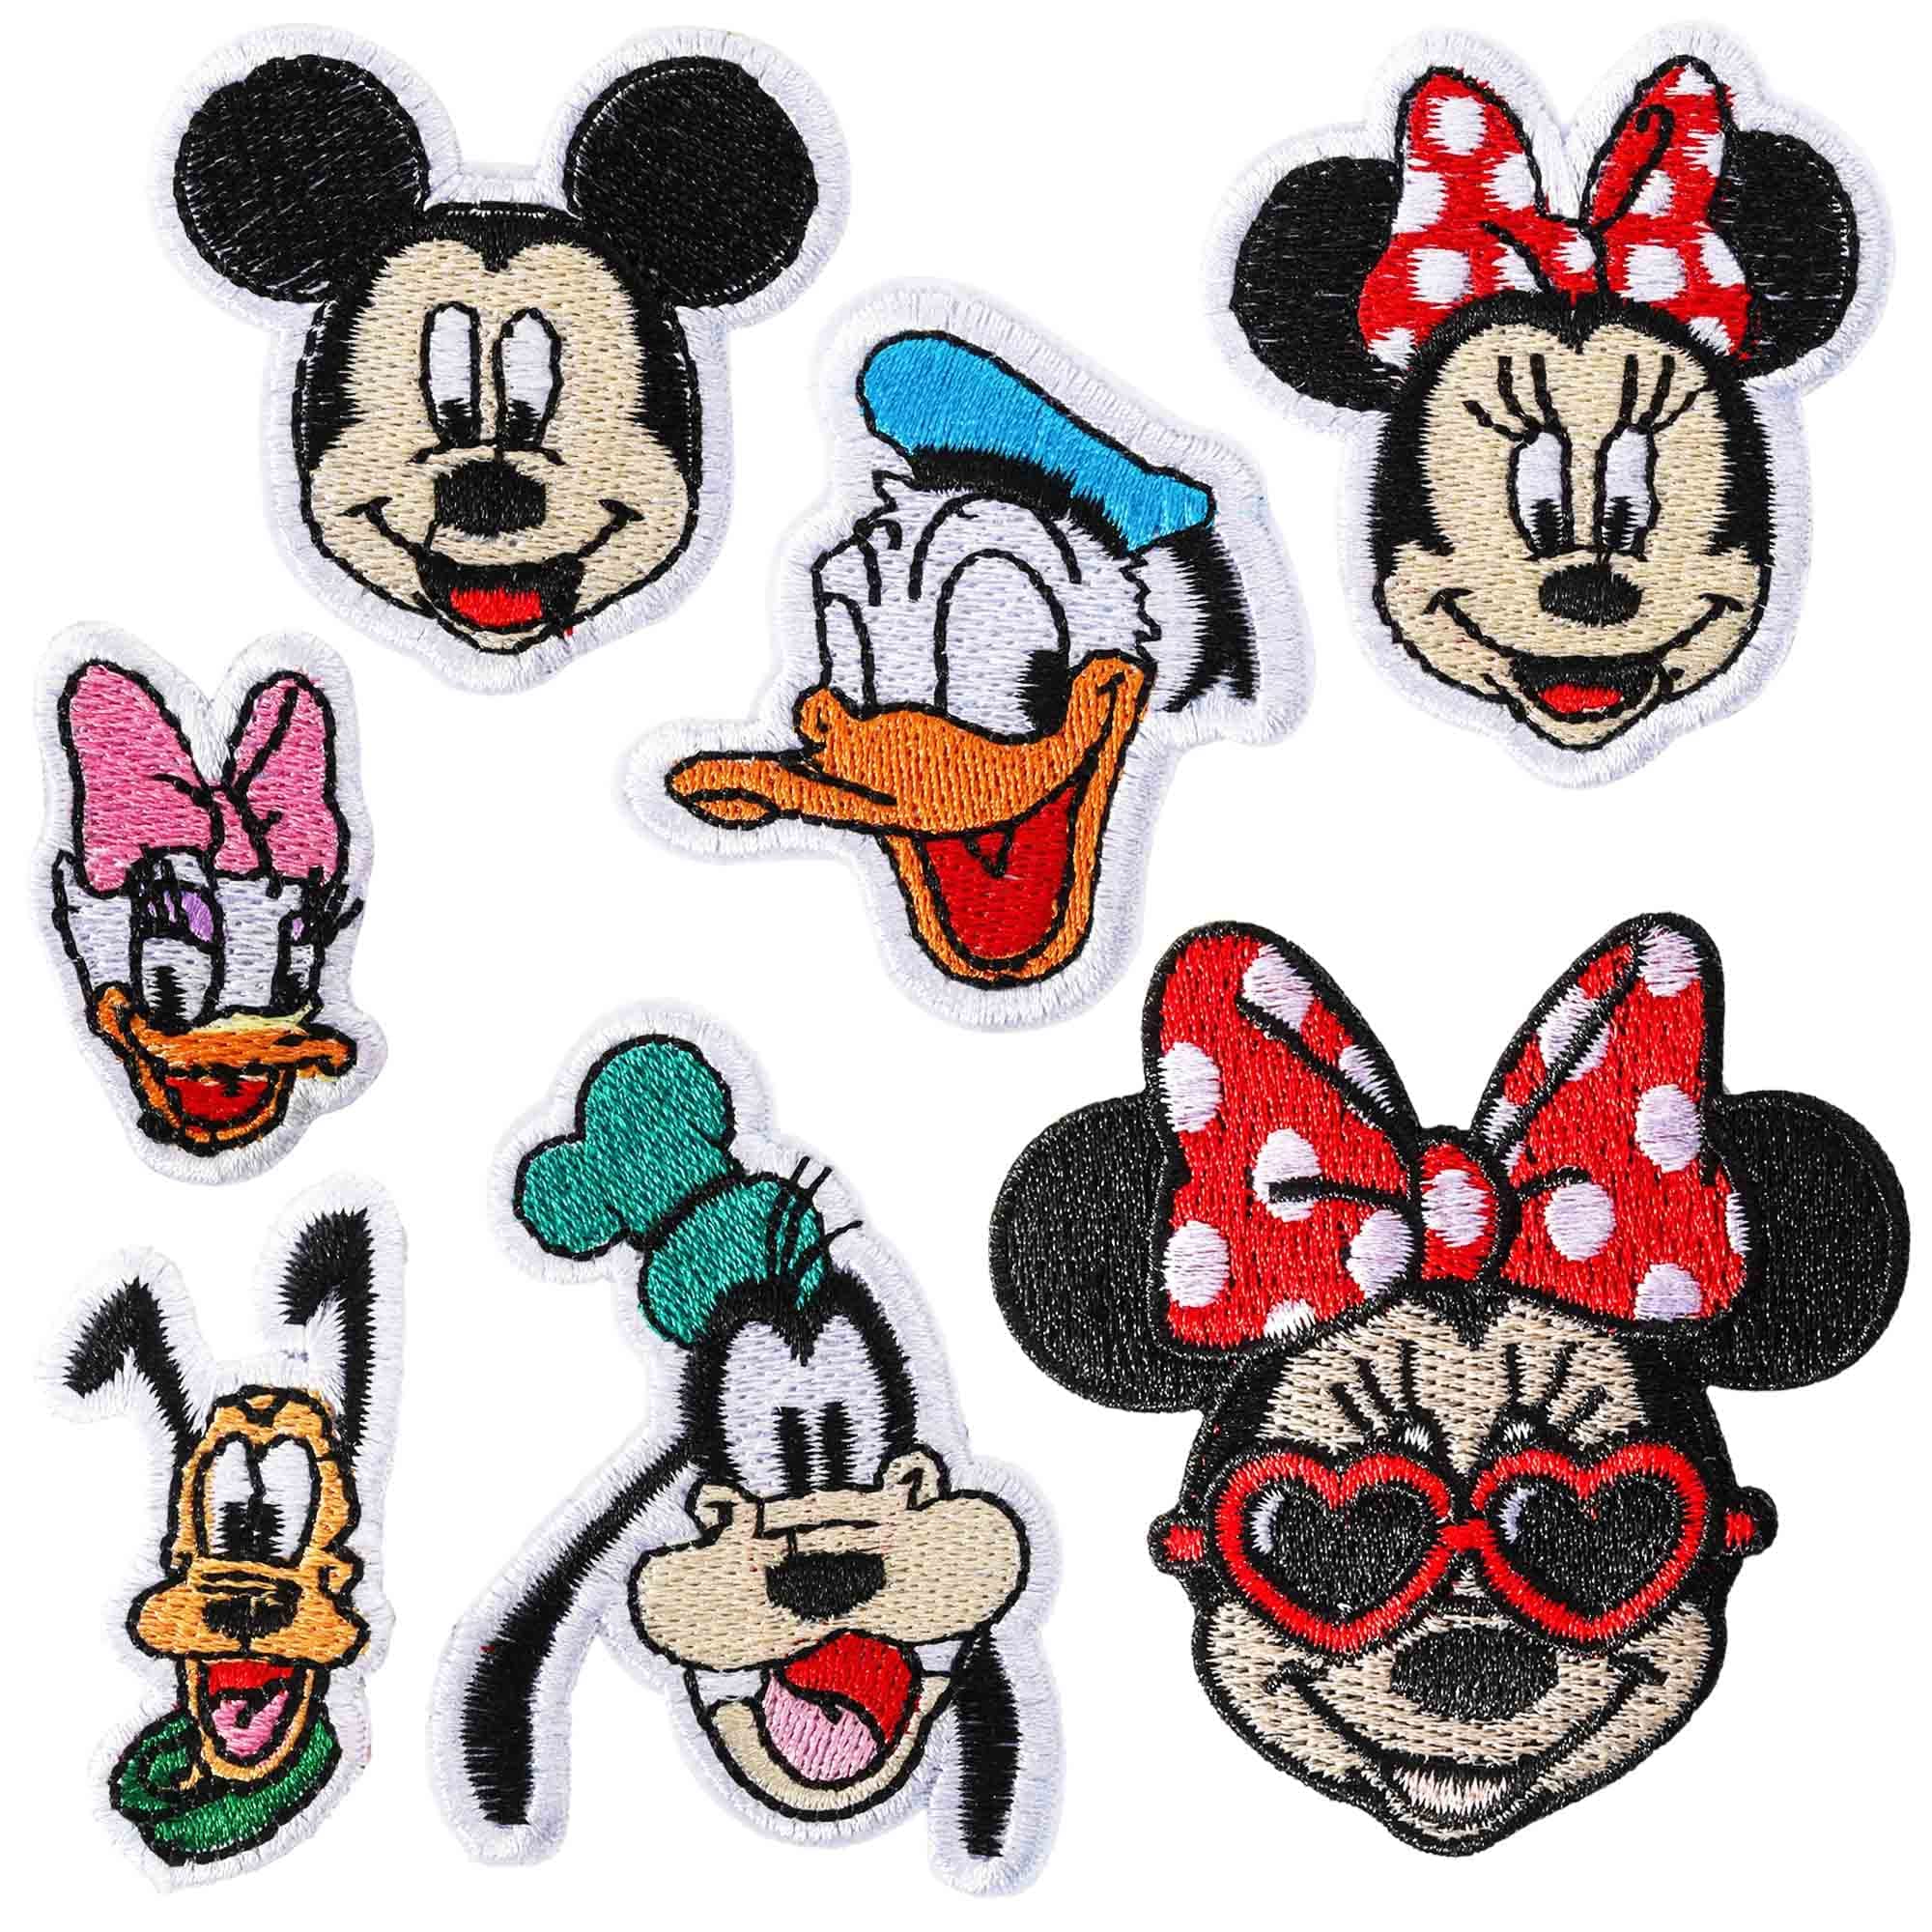 Mickey Mouse Walt Disney Cartoon Style-1 Embroidered Sew On Patch